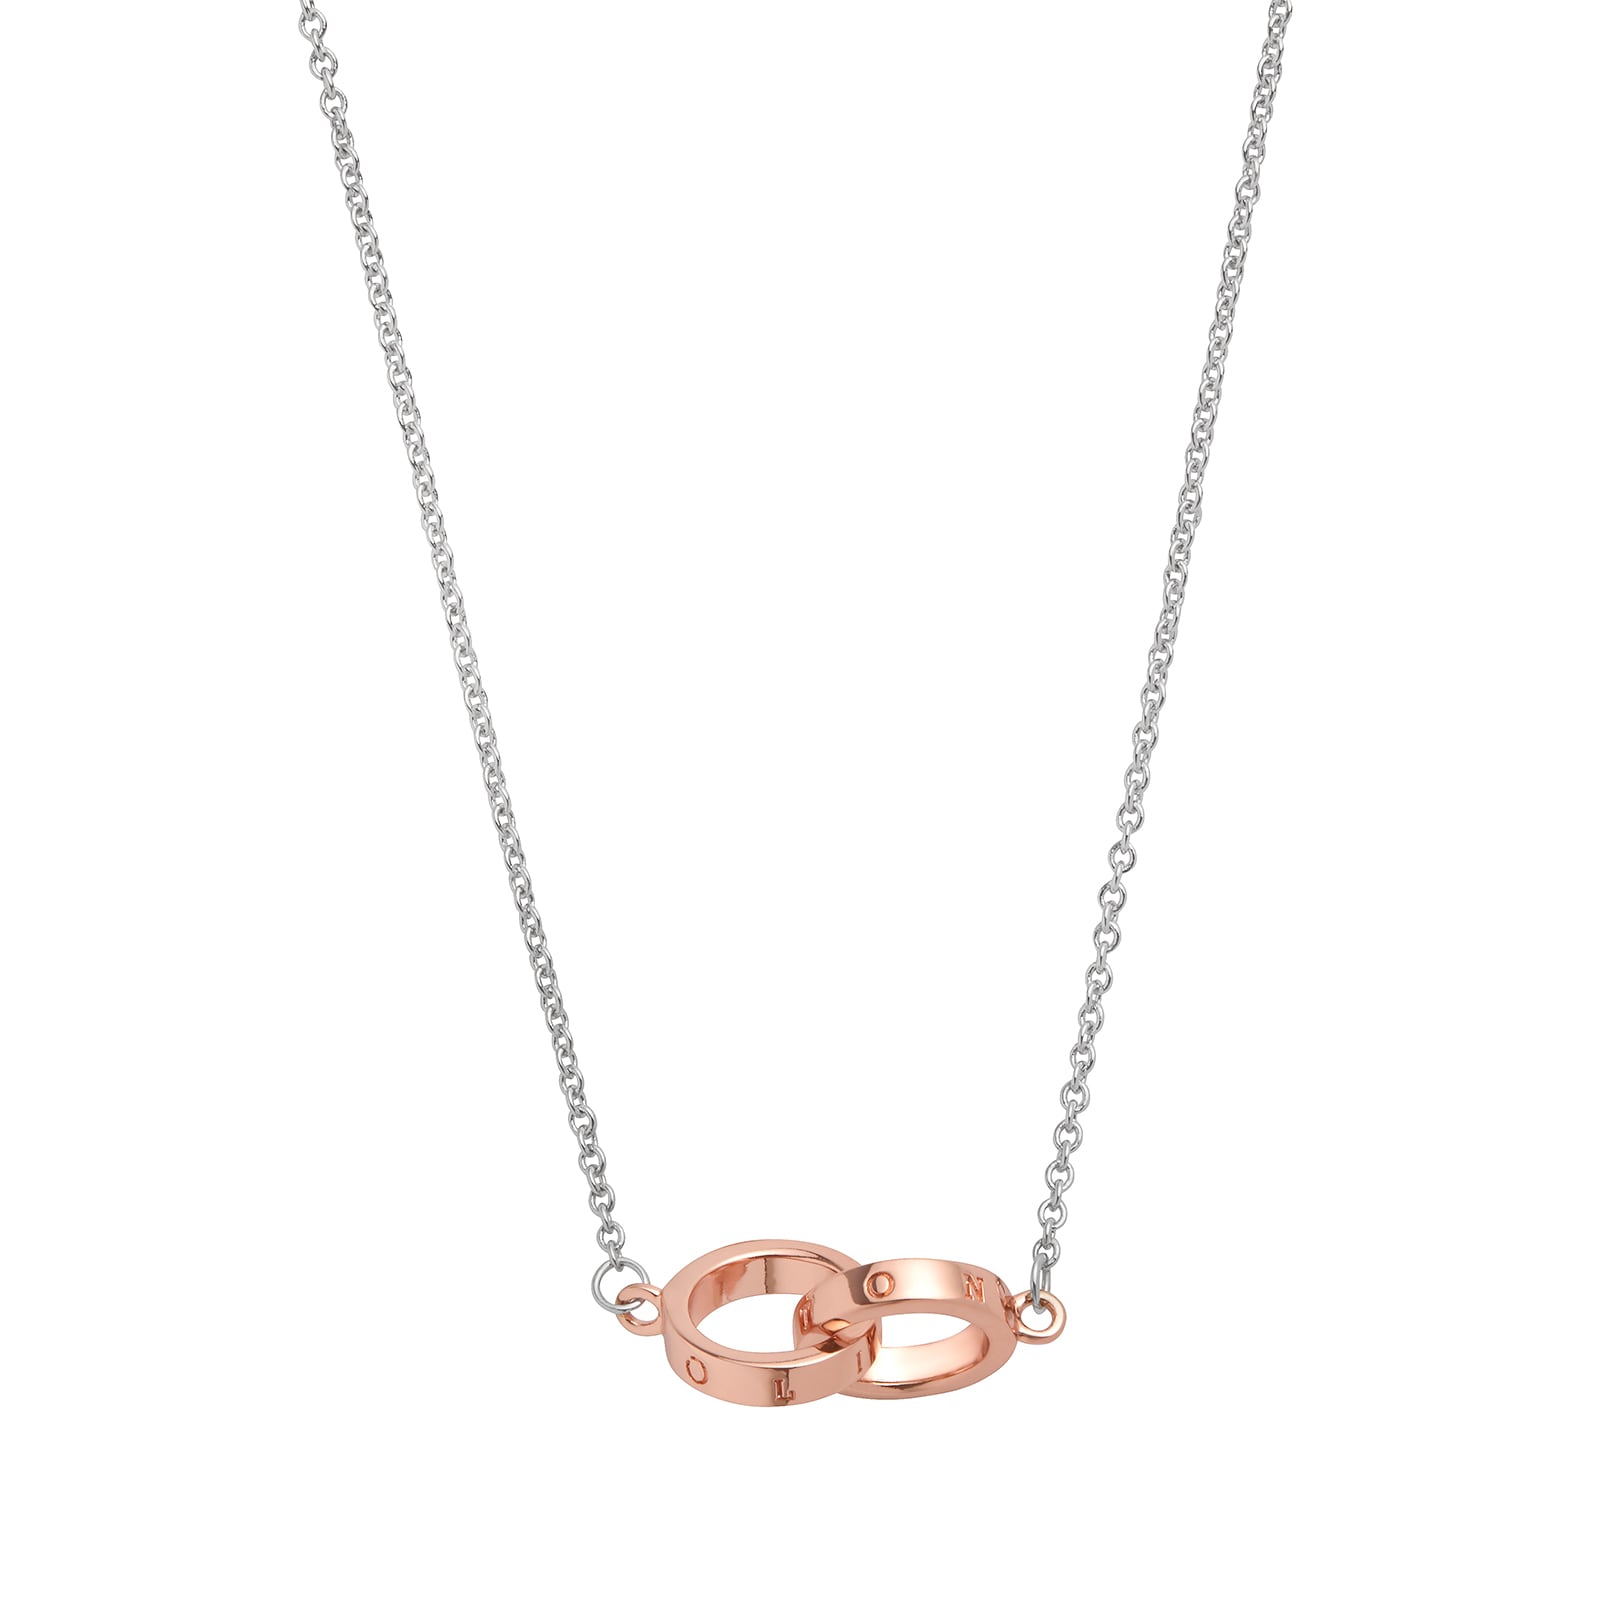 Silver & Rose Gold Plated Classics Interlink Necklace